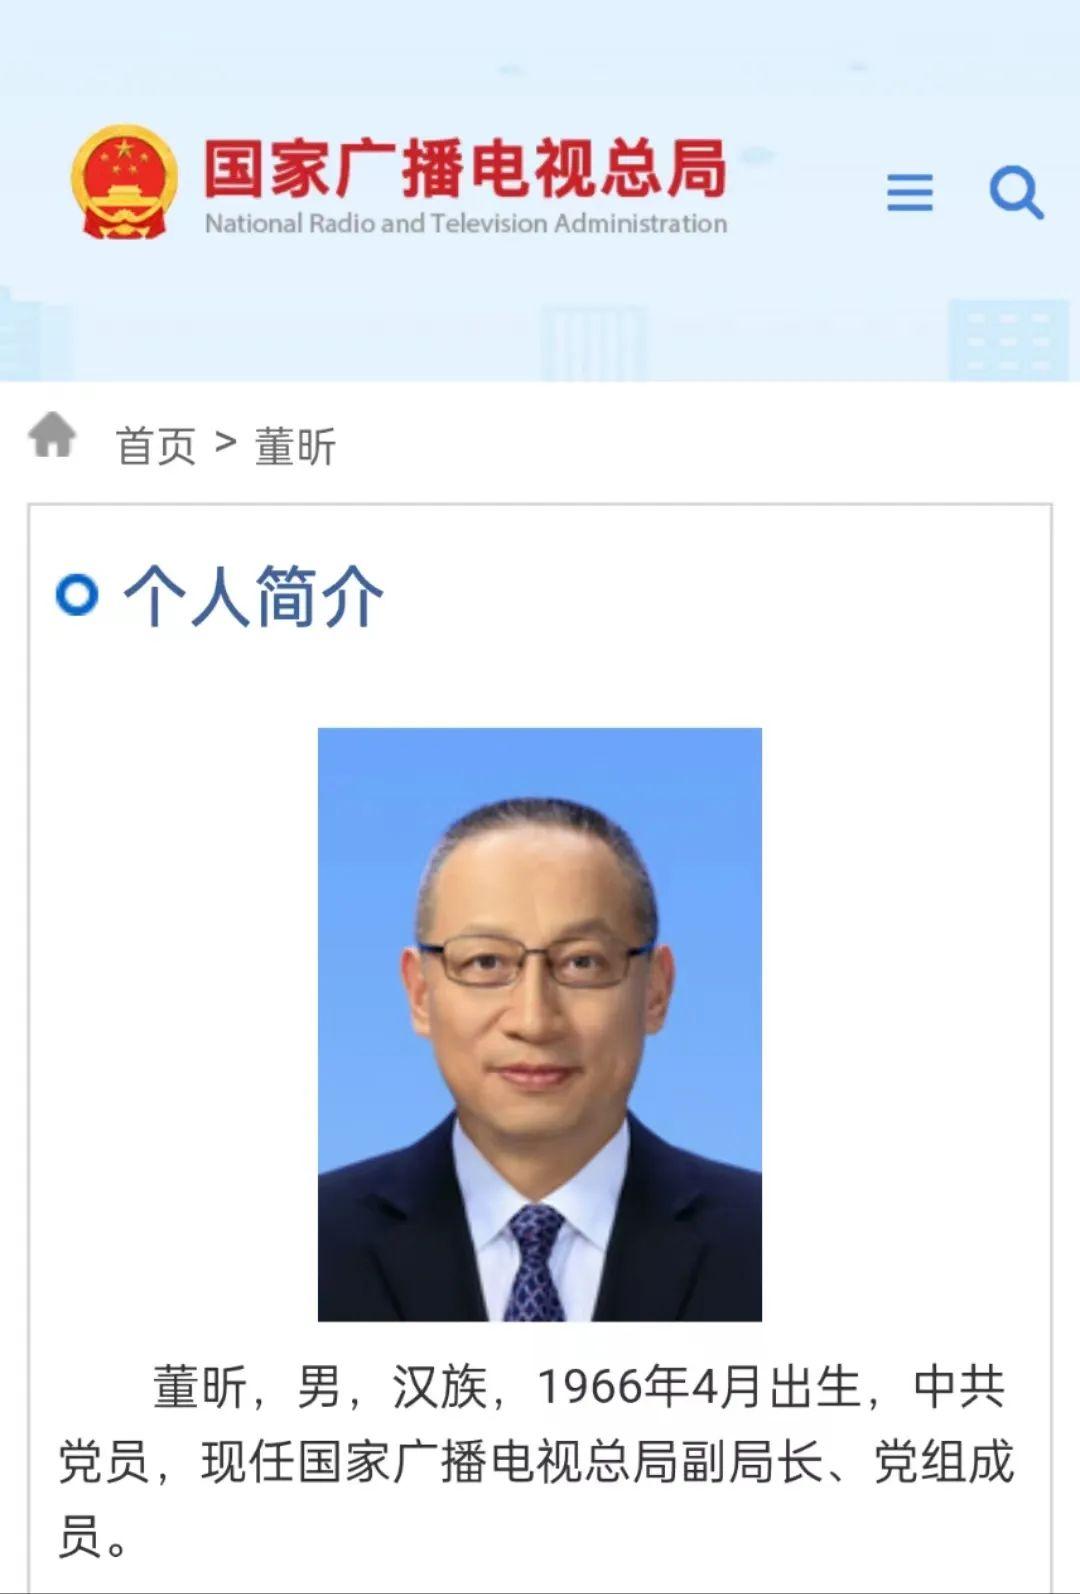 Dong Xin is the Deputy Director of the State Administration of Radio and Television and a member of the party group